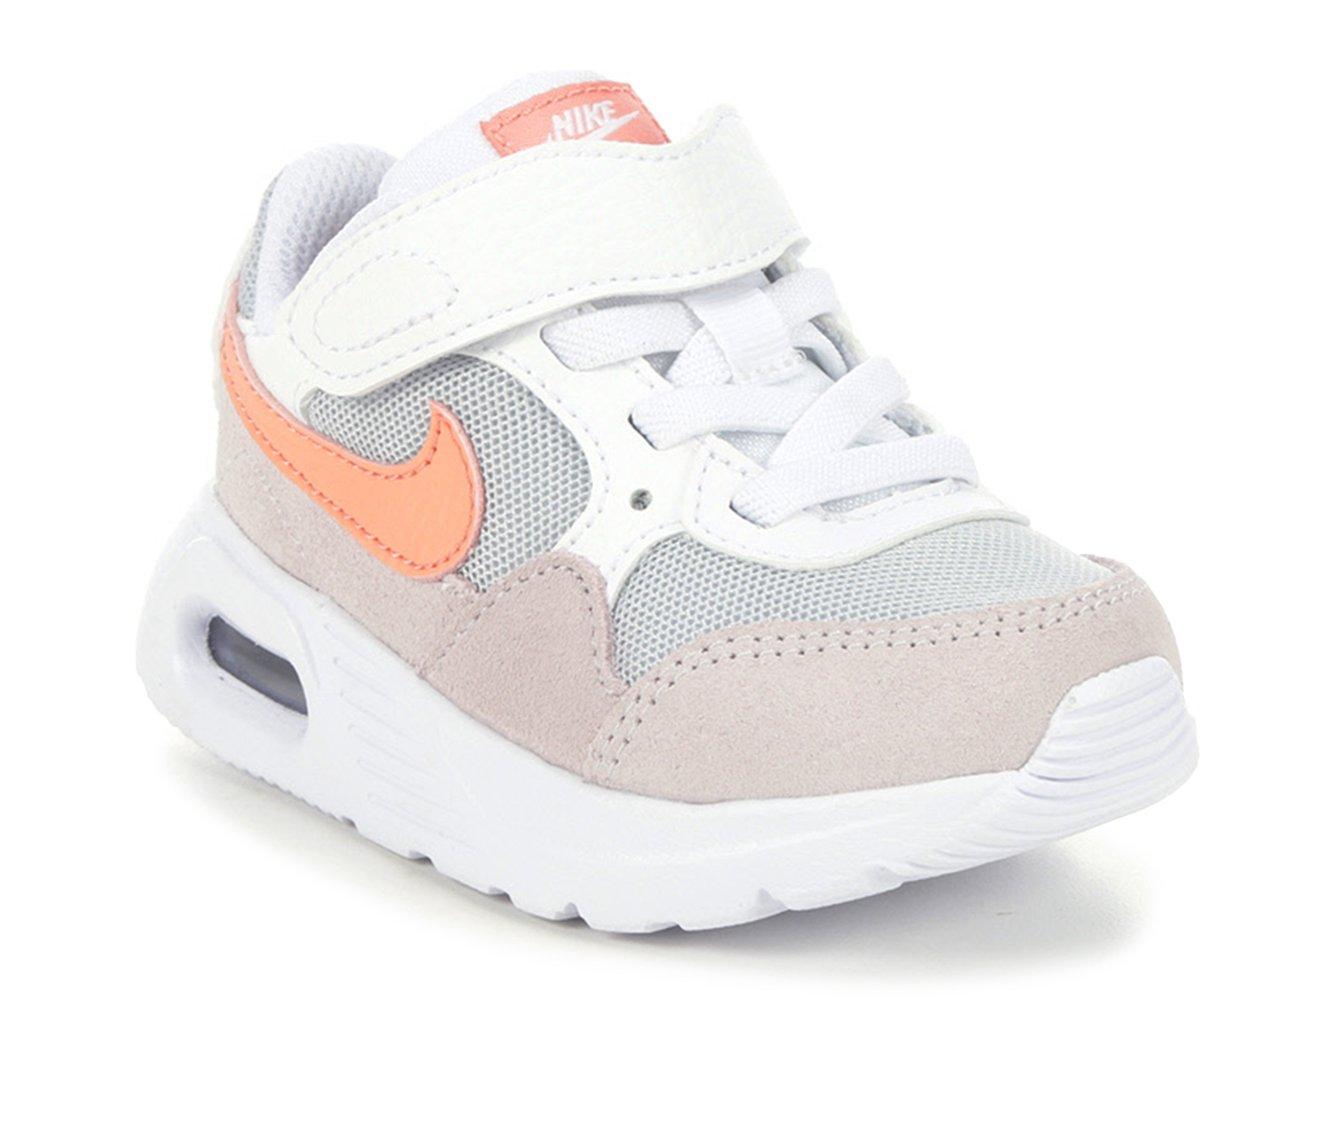 Girls' Infant Toddler Air Max SC Running Shoes